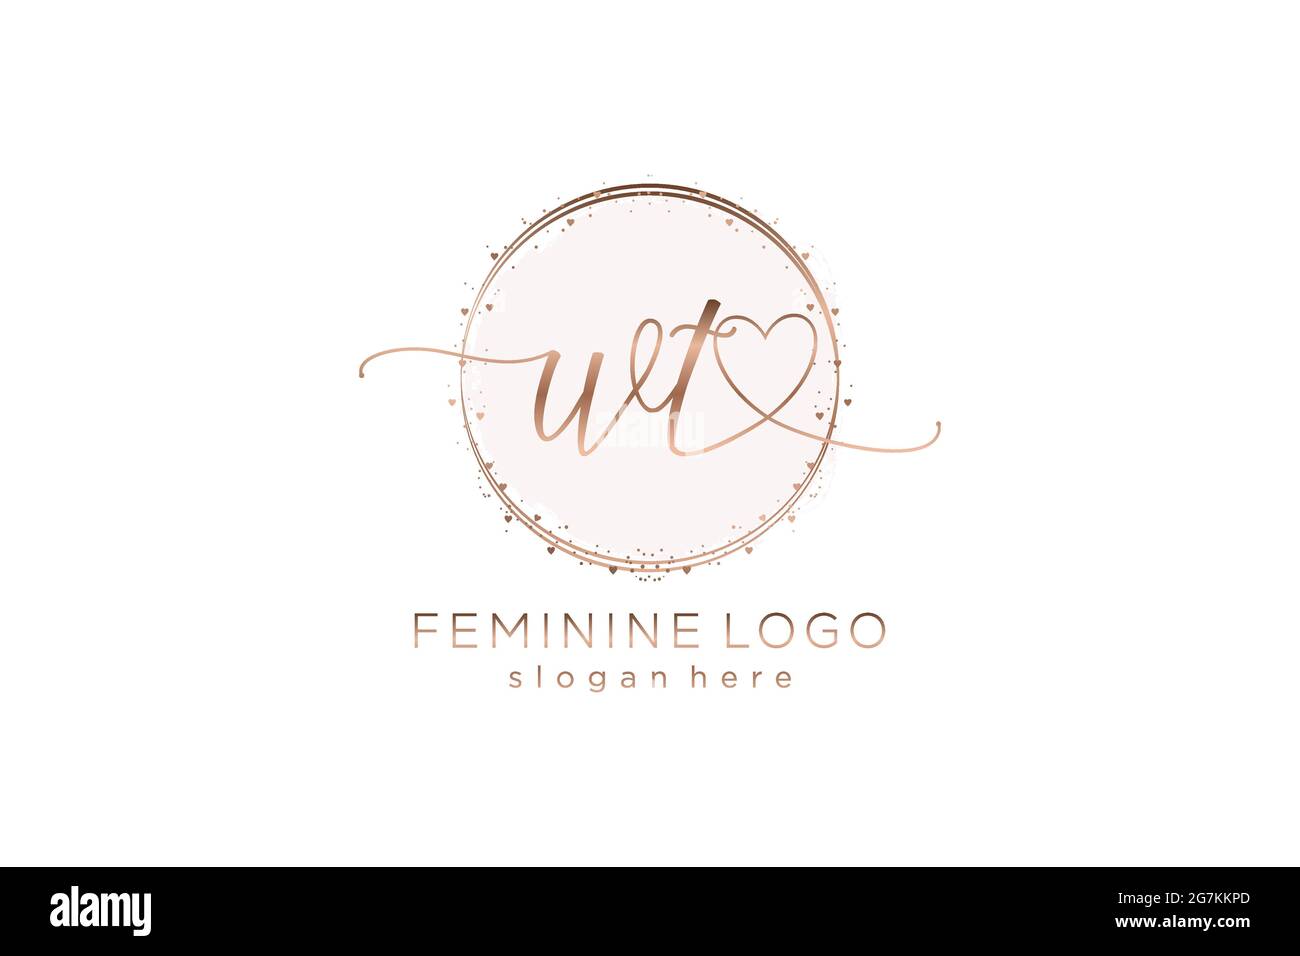 WT handwriting logo with circle template vector logo of initial wedding, fashion, floral and botanical with creative template. Stock Vector